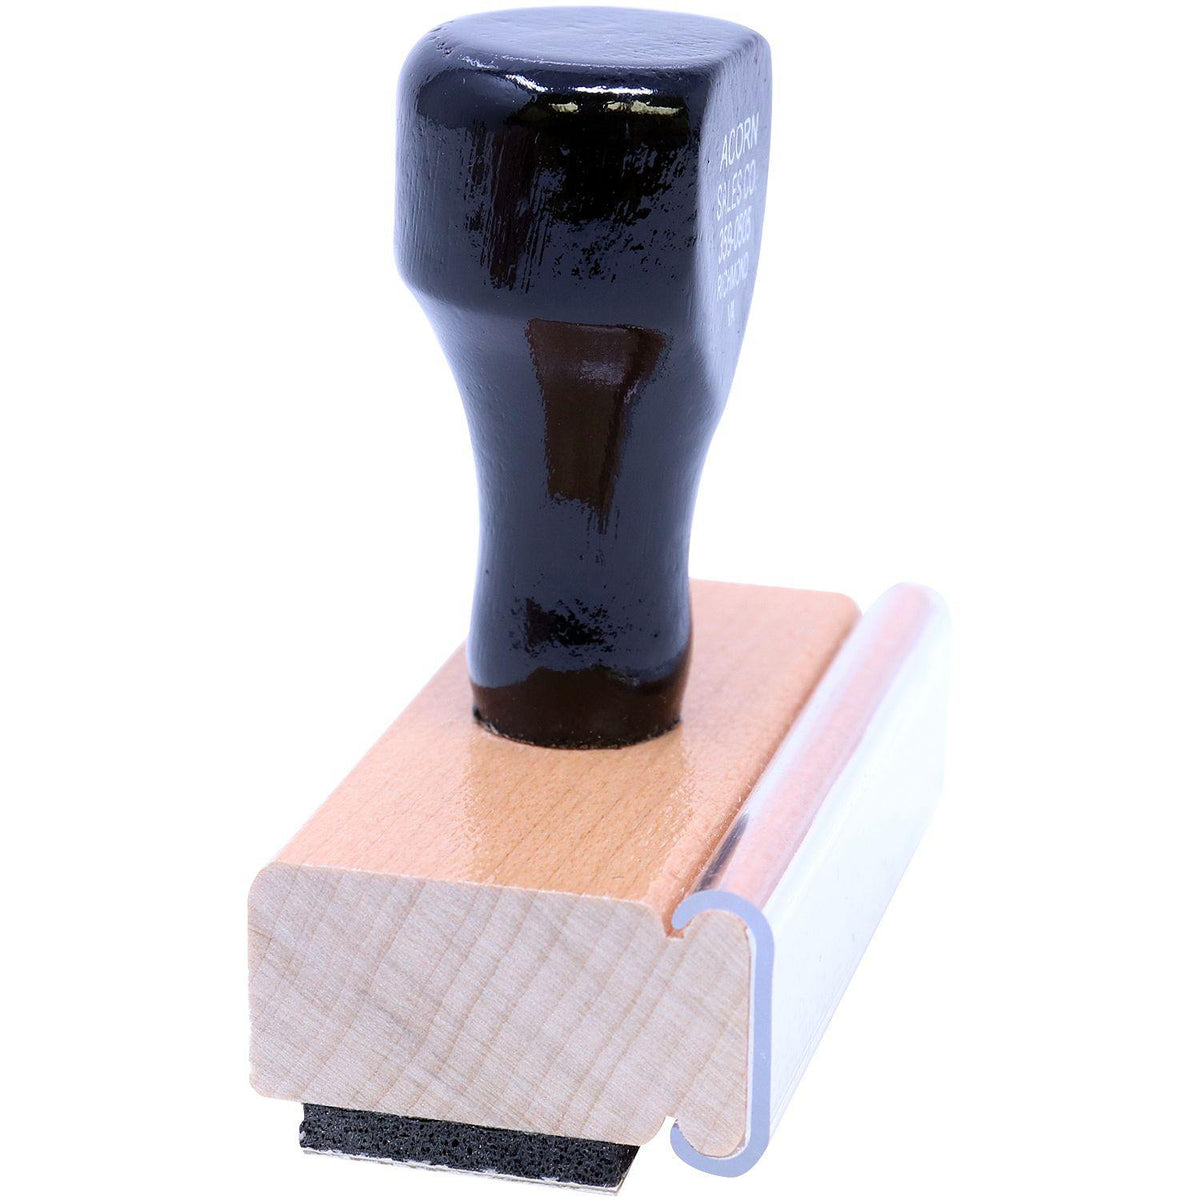 Side View of Emailed with Mailbox Rubber Stamp at an Angle